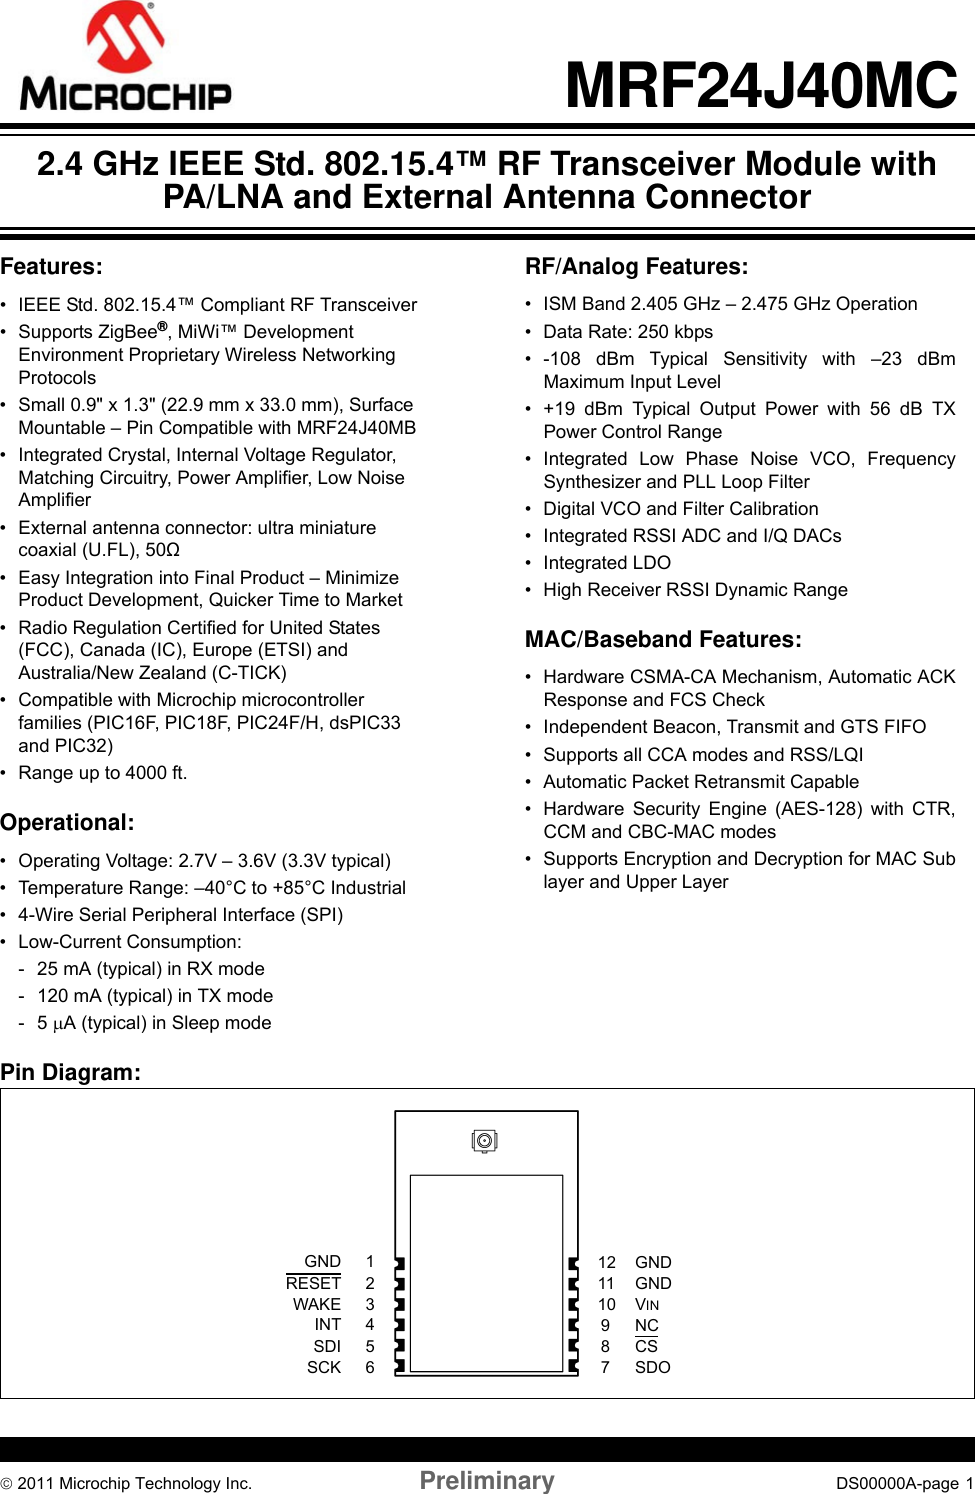 © 2011 Microchip Technology Inc. Preliminary DS00000A-page  1MRF24J40MC Features:• IEEE Std. 802.15.4™ Compliant RF Transceiver• Supports ZigBee®, MiWi™ Development Environment Proprietary Wireless Networking Protocols• Small 0.9&quot; x 1.3&quot; (22.9 mm x 33.0 mm), Surface Mountable – Pin Compatible with MRF24J40MB• Integrated Crystal, Internal Voltage Regulator, Matching Circuitry, Power Amplifier, Low Noise Amplifier• External antenna connector: ultra miniature coaxial (U.FL), 50Ω• Easy Integration into Final Product – Minimize Product Development, Quicker Time to Market• Radio Regulation Certified for United States (FCC), Canada (IC), Europe (ETSI) and Australia/New Zealand (C-TICK)• Compatible with Microchip microcontroller families (PIC16F, PIC18F, PIC24F/H, dsPIC33 and PIC32)• Range up to 4000 ft. Operational:• Operating Voltage: 2.7V – 3.6V (3.3V typical)• Temperature Range: –40°C to +85°C Industrial• 4-Wire Serial Peripheral Interface (SPI)• Low-Current Consumption:- 25 mA (typical) in RX mode- 120 mA (typical) in TX mode-5 μA (typical) in Sleep mode RF/Analog Features: • ISM Band 2.405 GHz – 2.475 GHz Operation• Data Rate: 250 kbps• -108 dBm Typical Sensitivity with –23 dBm Maximum Input Level• +19 dBm Typical Output Power with 56 dB TX Power Control Range• Integrated Low Phase Noise VCO, Frequency Synthesizer and PLL Loop Filter• Digital VCO and Filter Calibration• Integrated RSSI ADC and I/Q DACs• Integrated LDO• High Receiver RSSI Dynamic RangeMAC/Baseband Features:• Hardware CSMA-CA Mechanism, Automatic ACK Response and FCS Check• Independent Beacon, Transmit and GTS FIFO• Supports all CCA modes and RSS/LQI• Automatic Packet Retransmit Capable• Hardware Security Engine (AES-128) with CTR, CCM and CBC-MAC modes• Supports Encryption and Decryption for MAC Sub layer and Upper LayerPin Diagram:2345617VINGND8910RESETWAKESDOSDISCKCSNCGNDINT1211 GND2.4 GHz IEEE Std. 802.15.4™ RF Transceiver Module with PA/LNA and External Antenna Connector